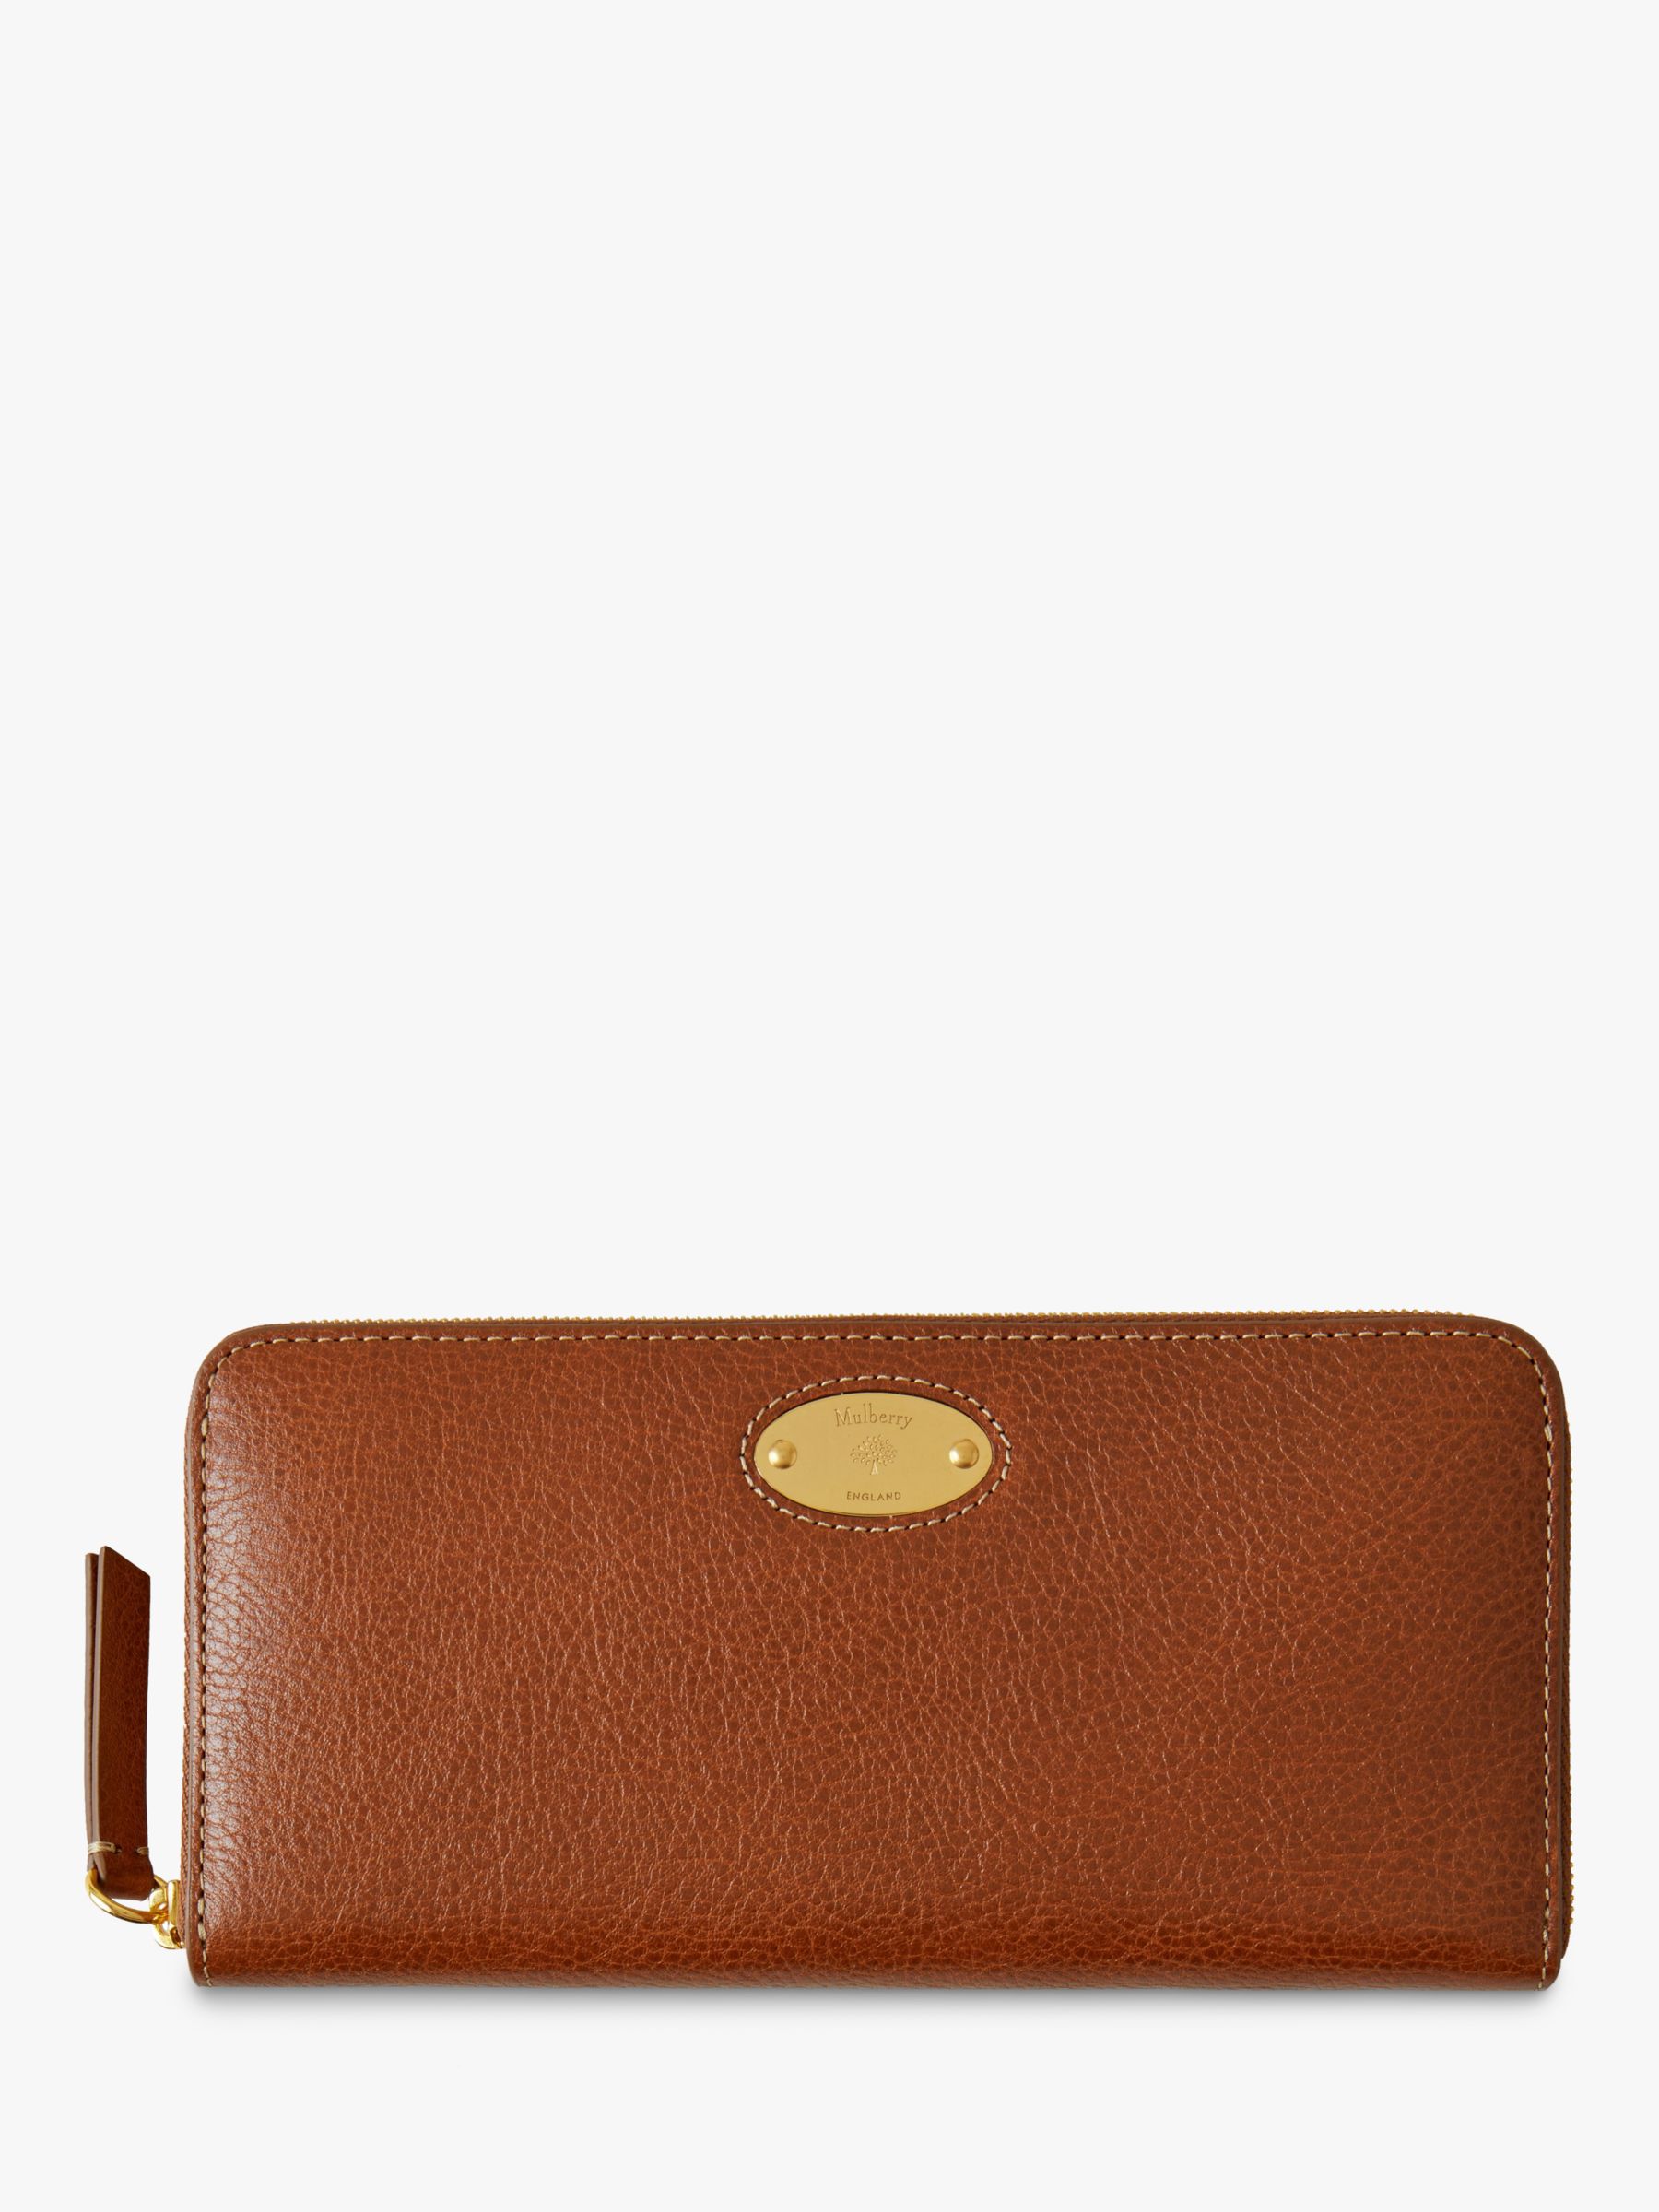 Buy Mulberry Plaque Small Classic Grain Leather 8 Card Zip Around Wallet Online at johnlewis.com